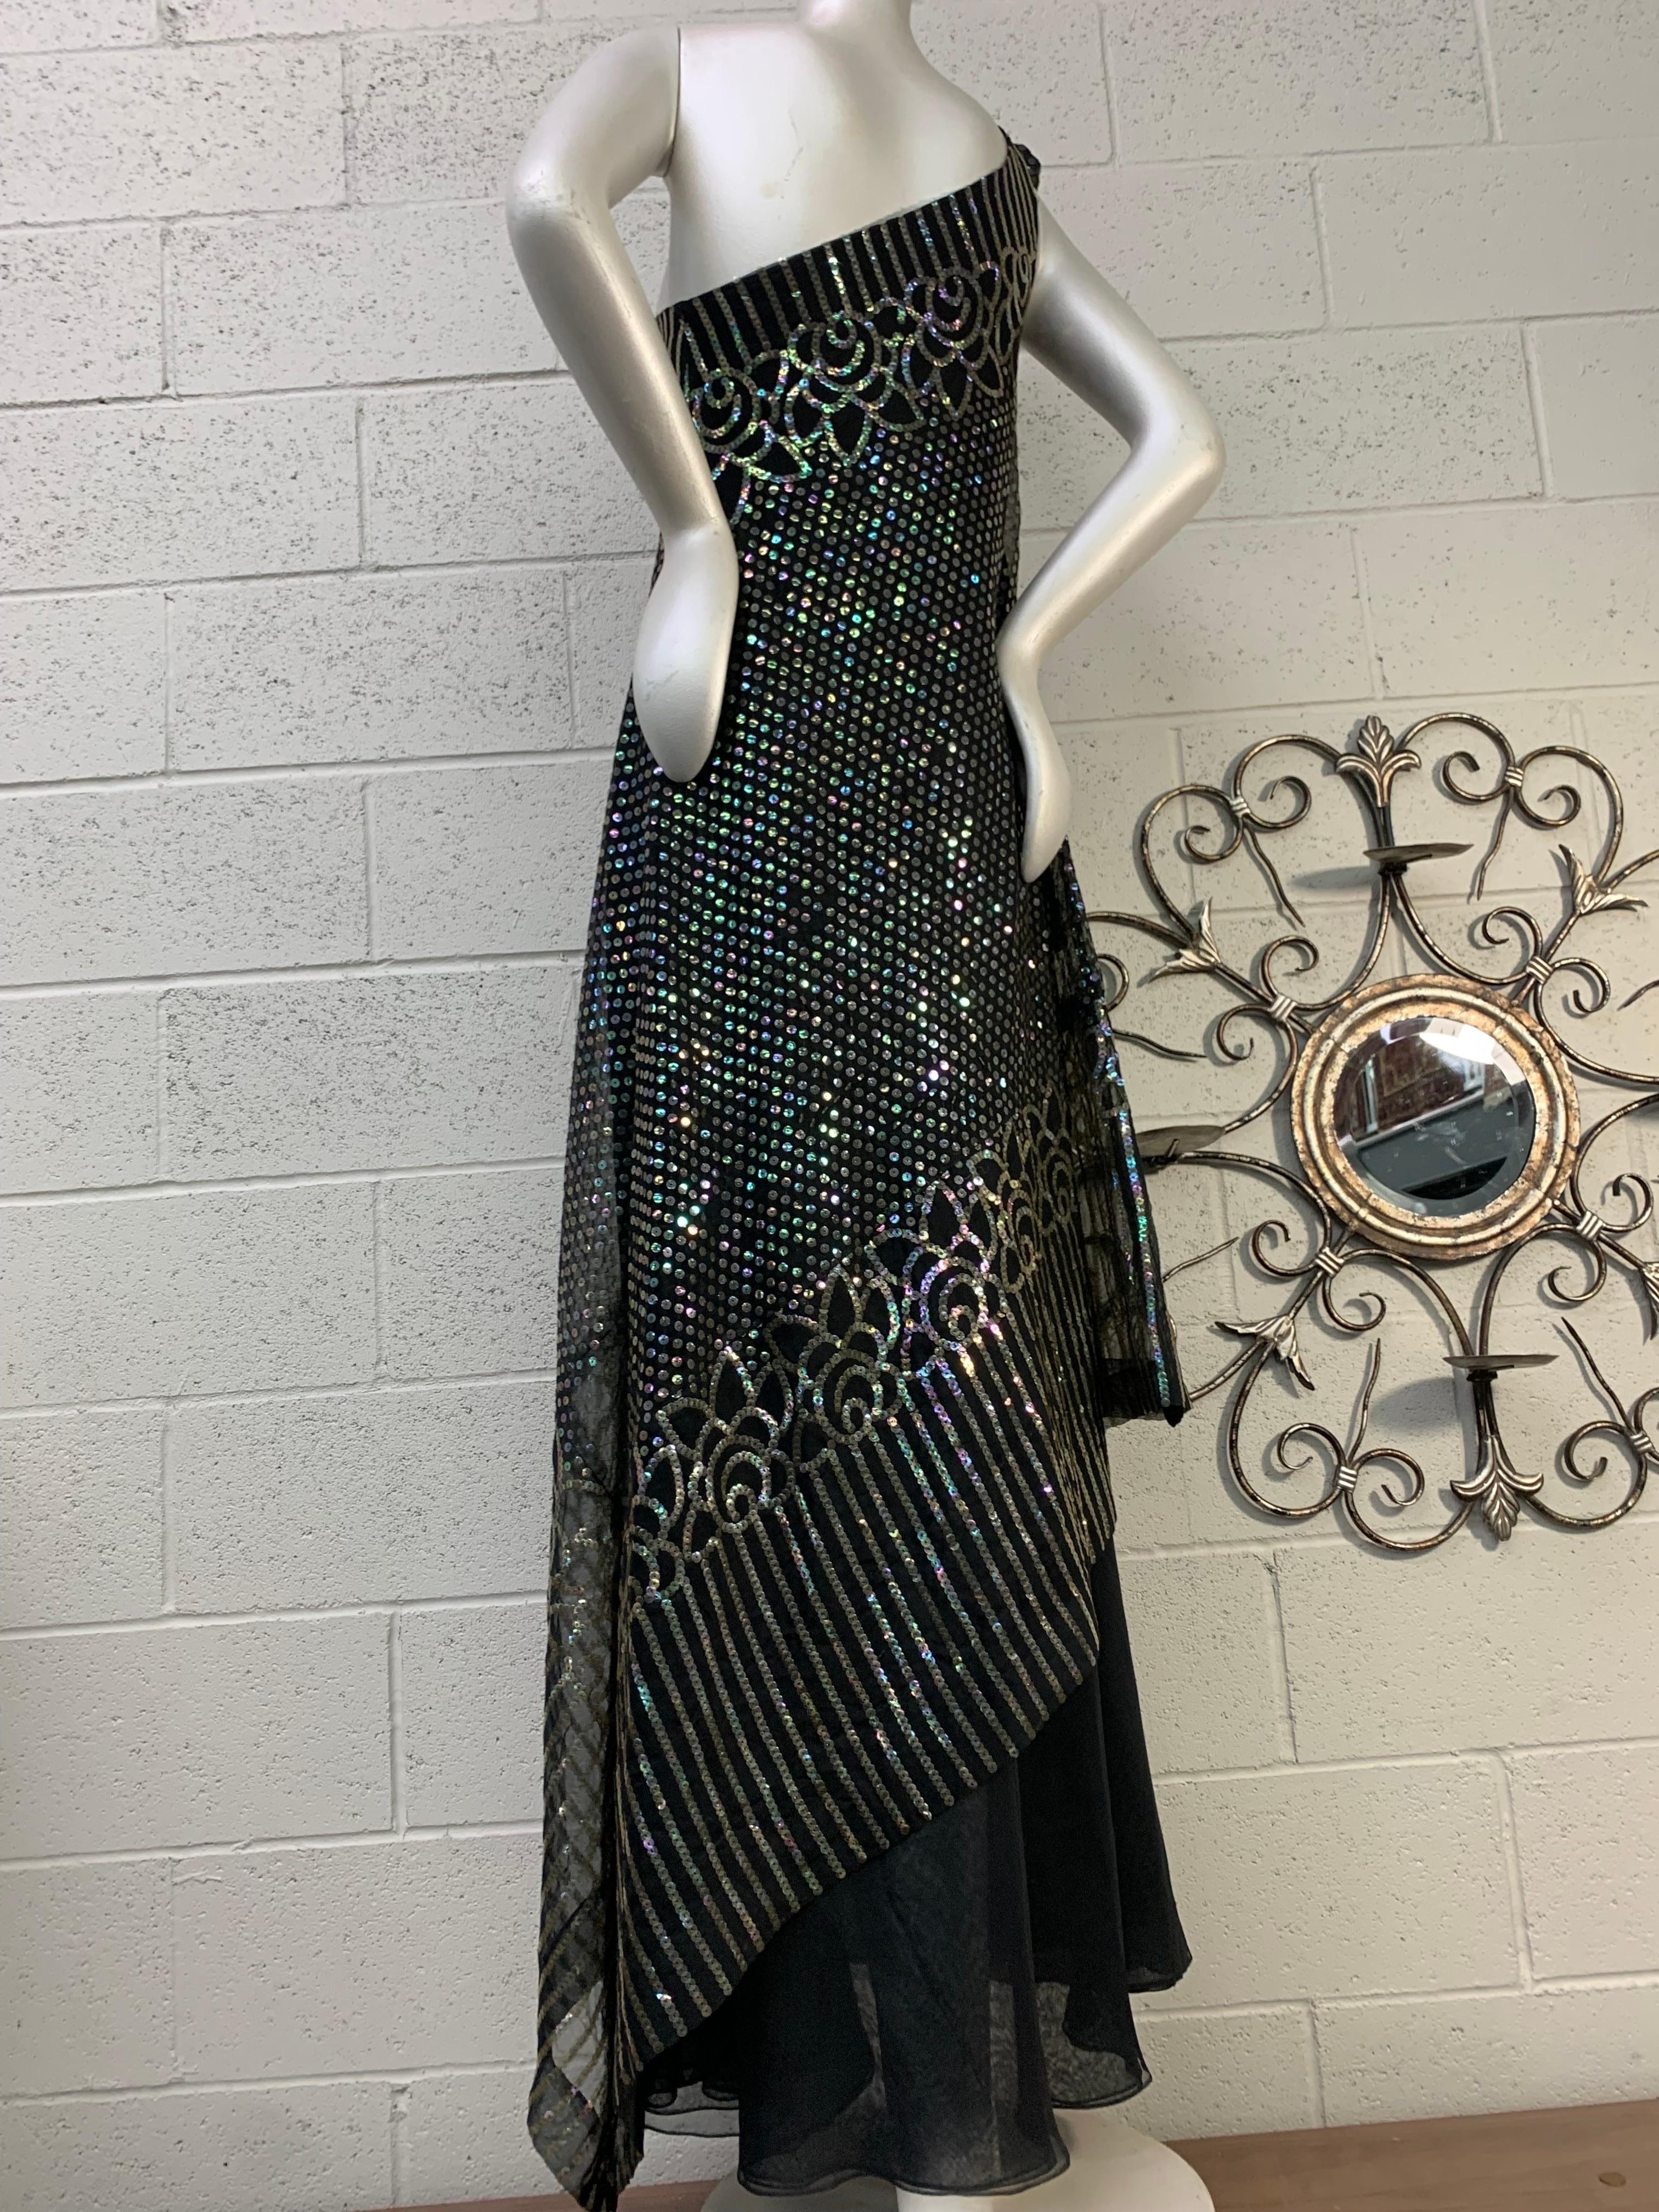 1970 Ruben Panis Black Chiffon Hologram Sequin Art Deco Styled One-Shoulder Gown For Sale 6